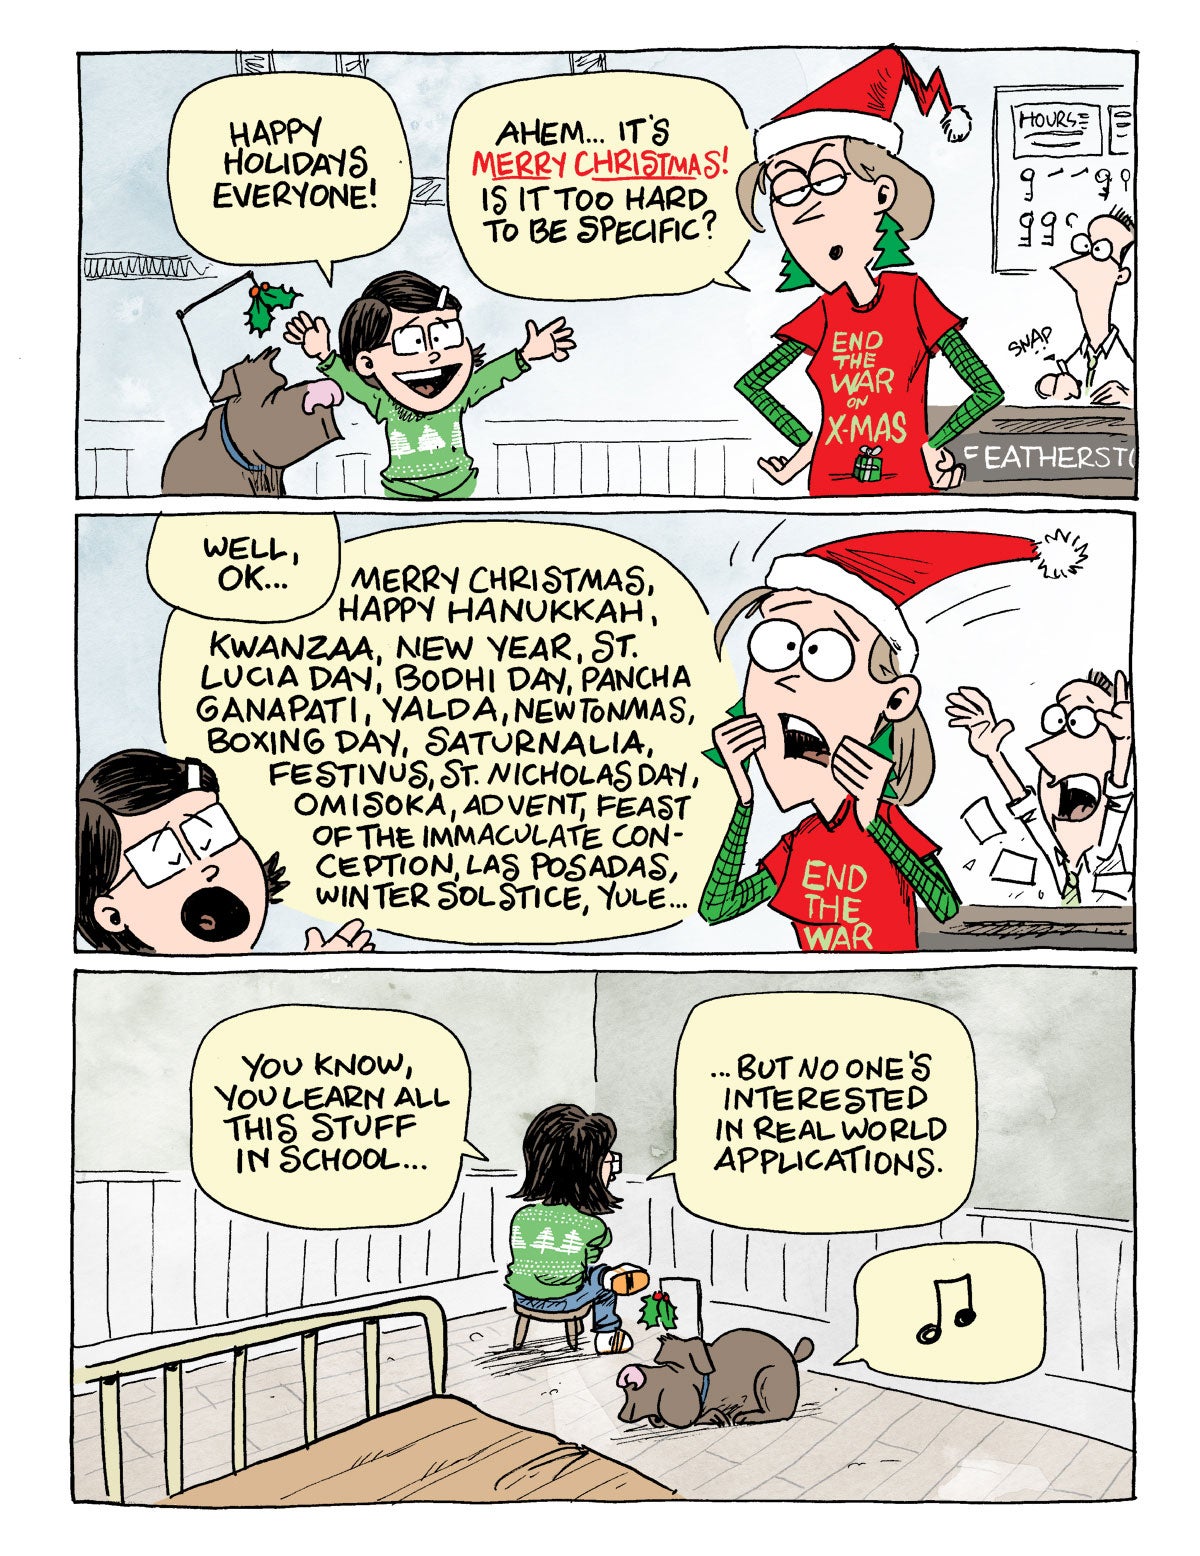 20141204-War-on-Xmas-FINAL-for-web